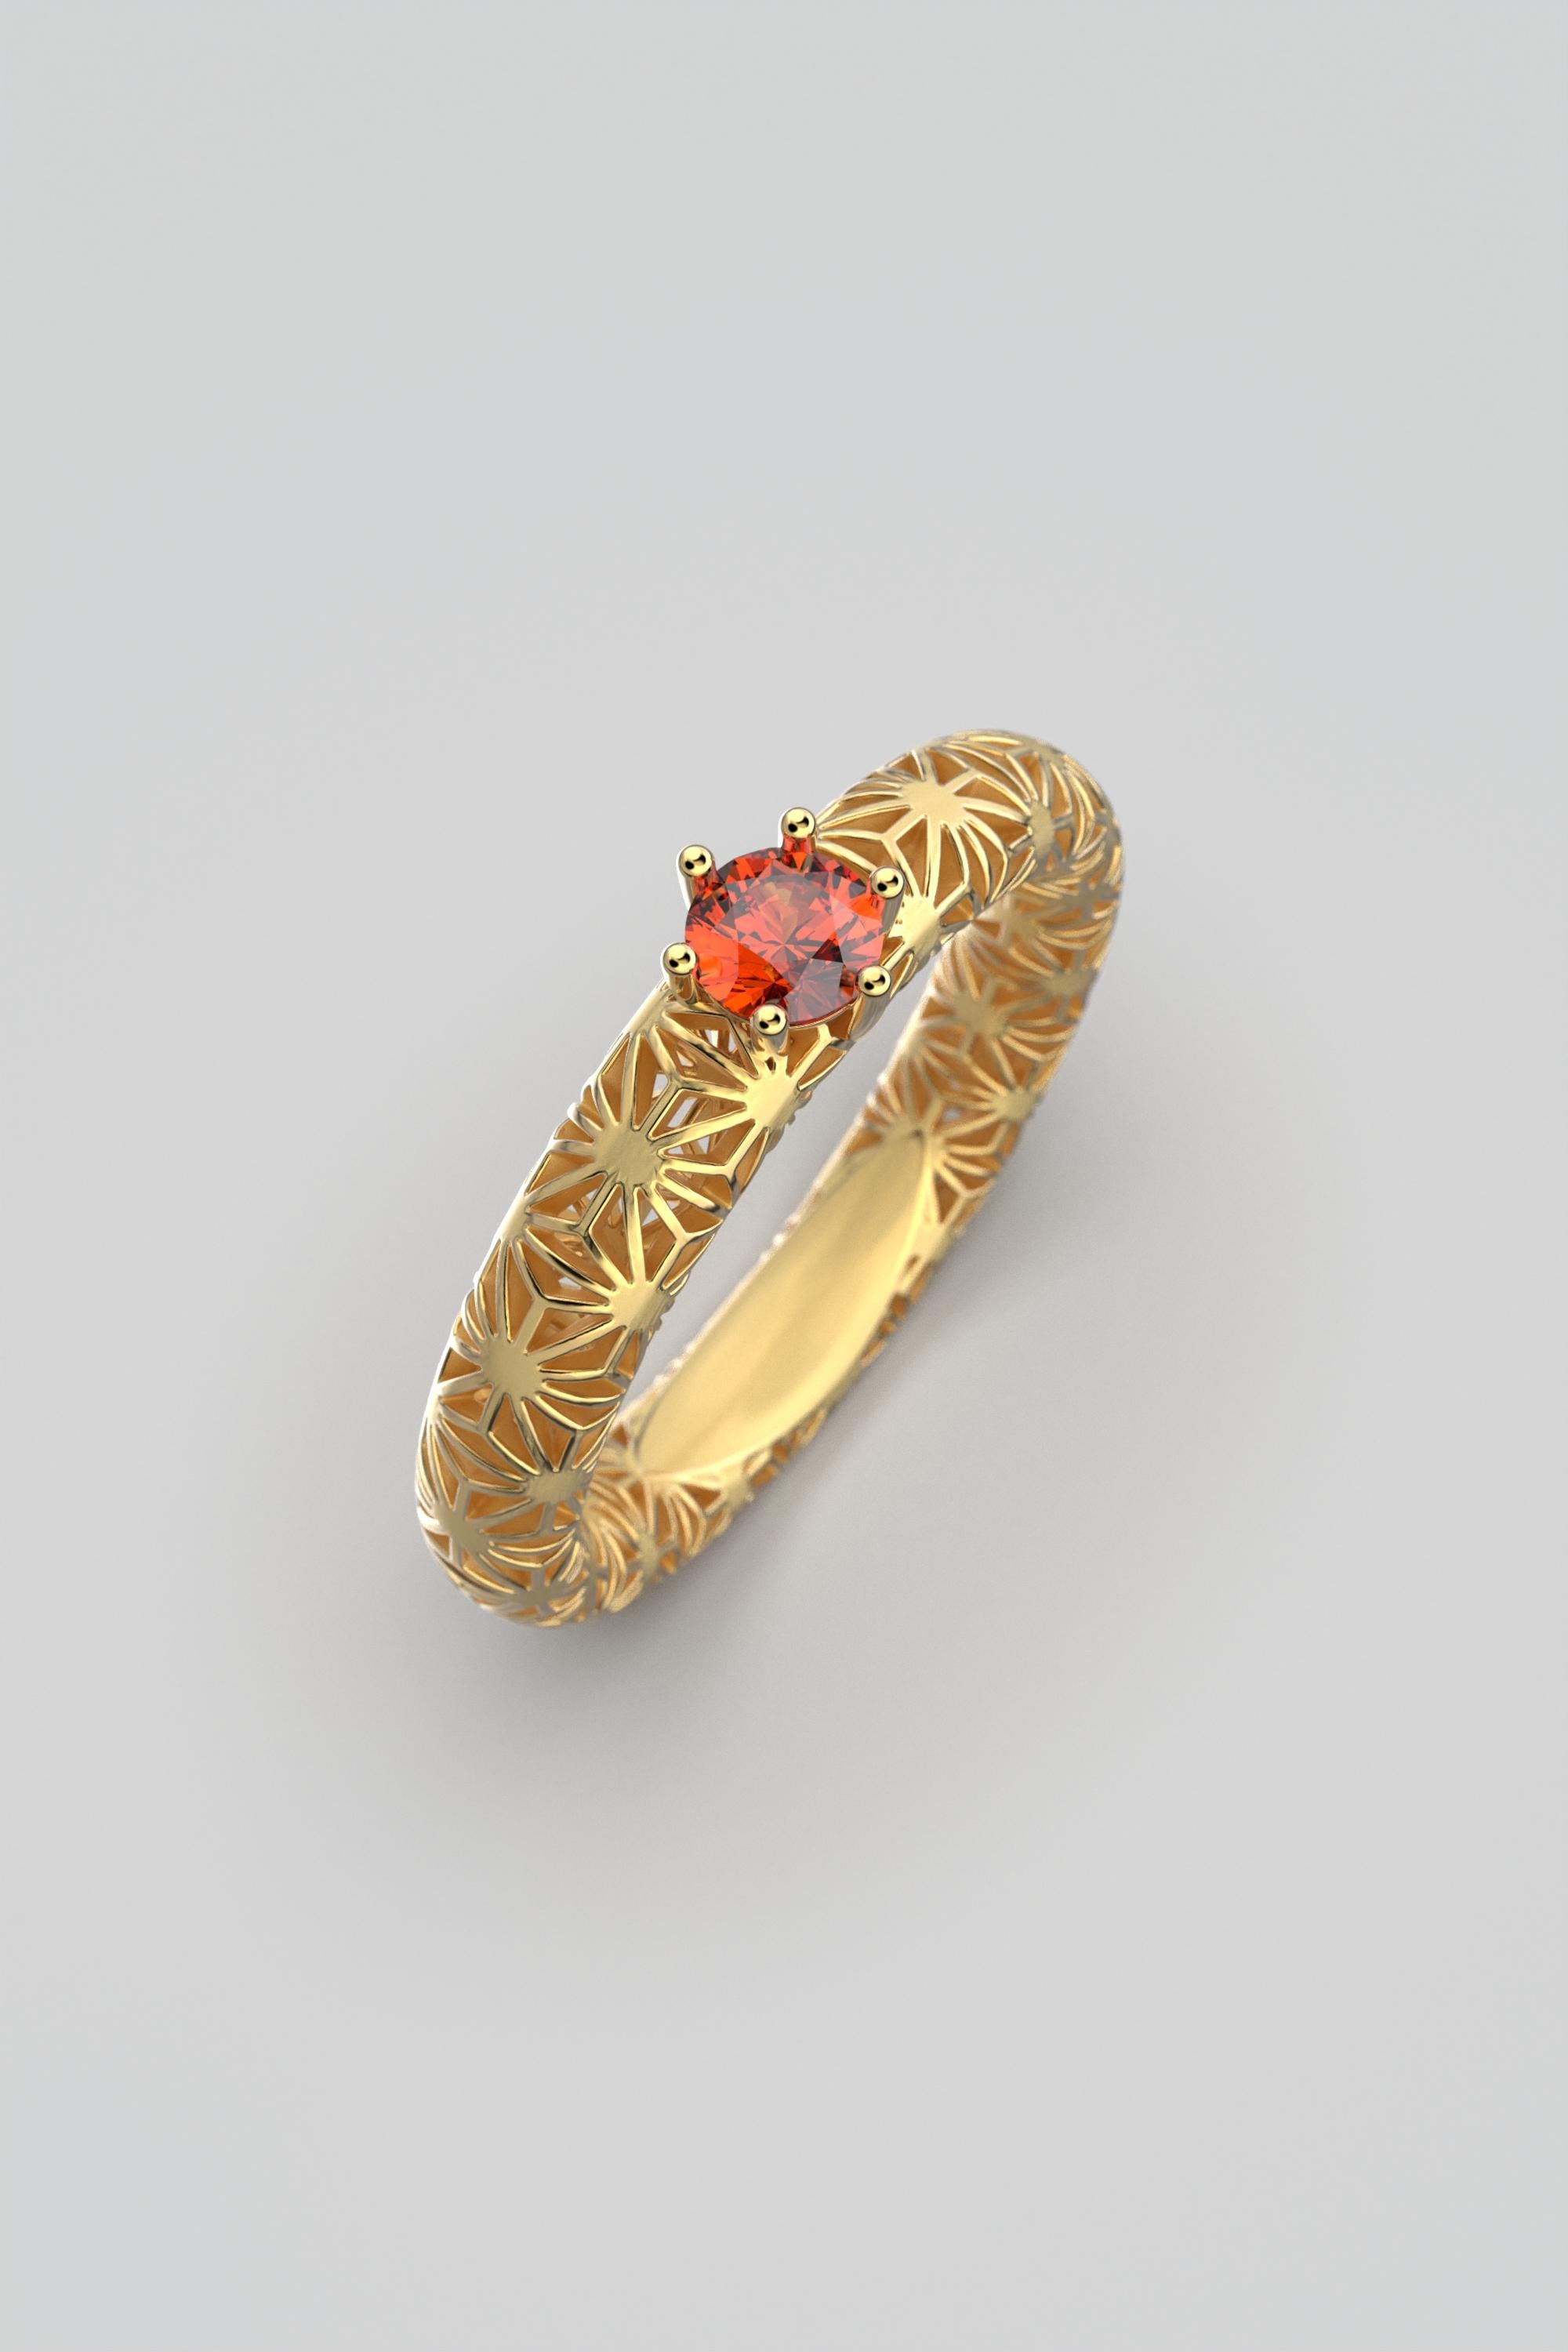 For Sale:  Orange Sapphire 18k Gold Band, Sashiko Pattern Gold Ring By Oltremare Gioielli 3